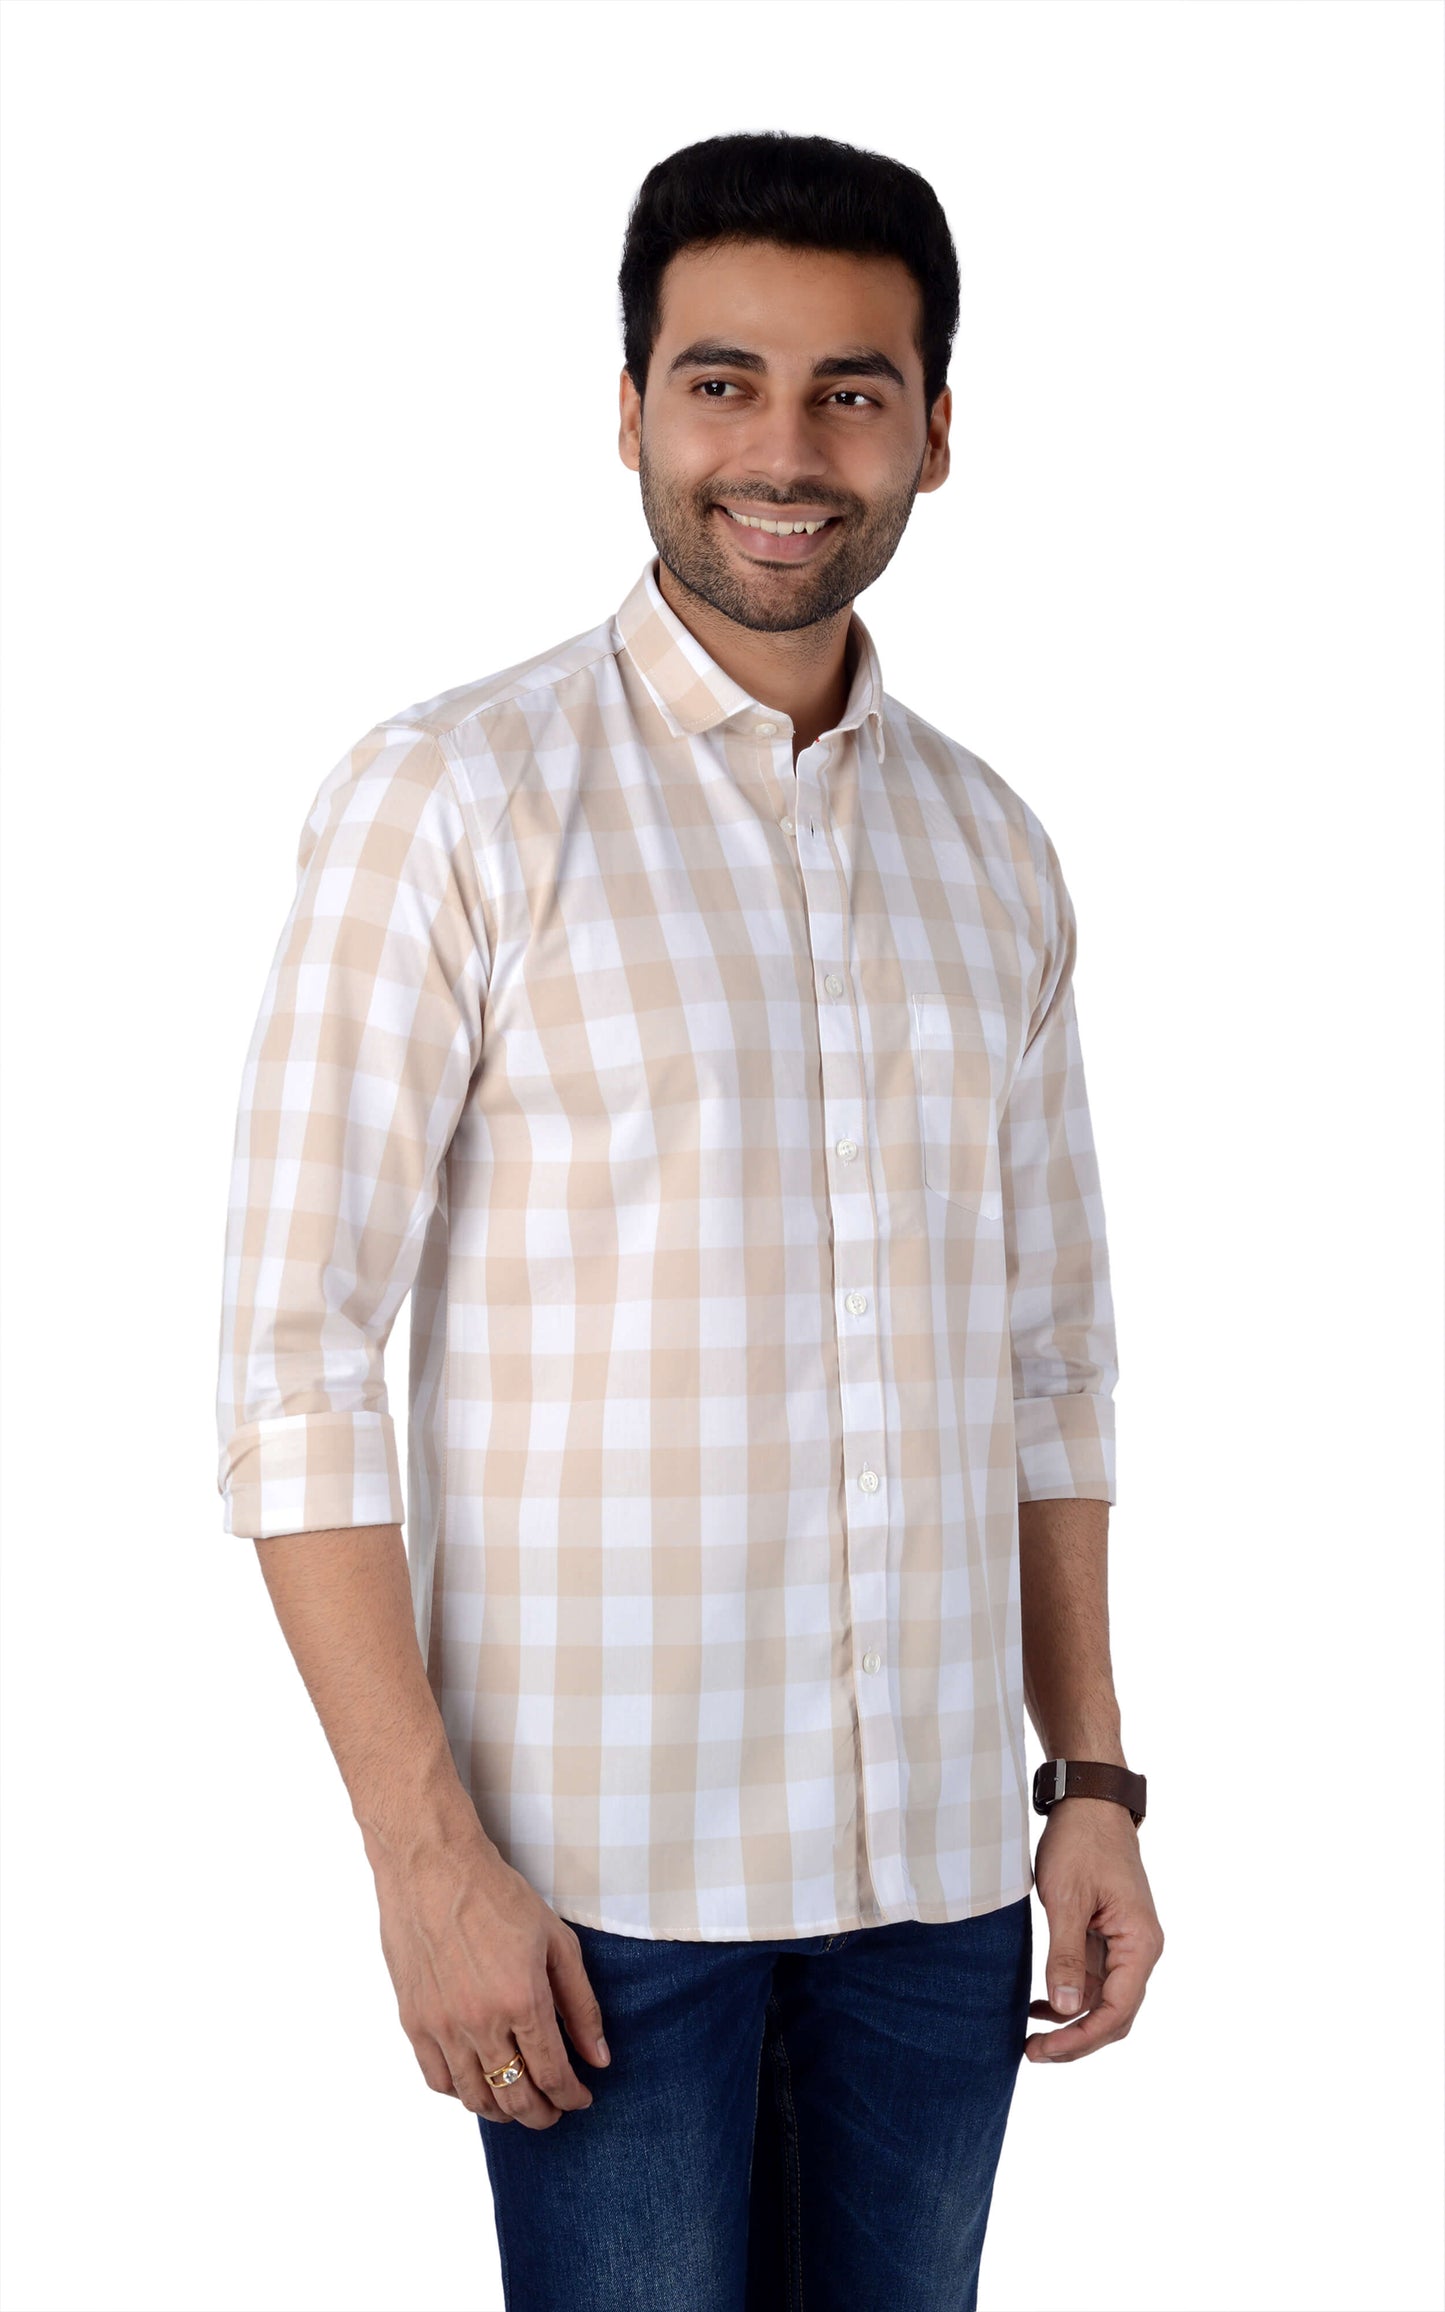 5thanfold Men's Casual Pure Cotton Full Sleeve Checkered Brown Slim Fit Shirt